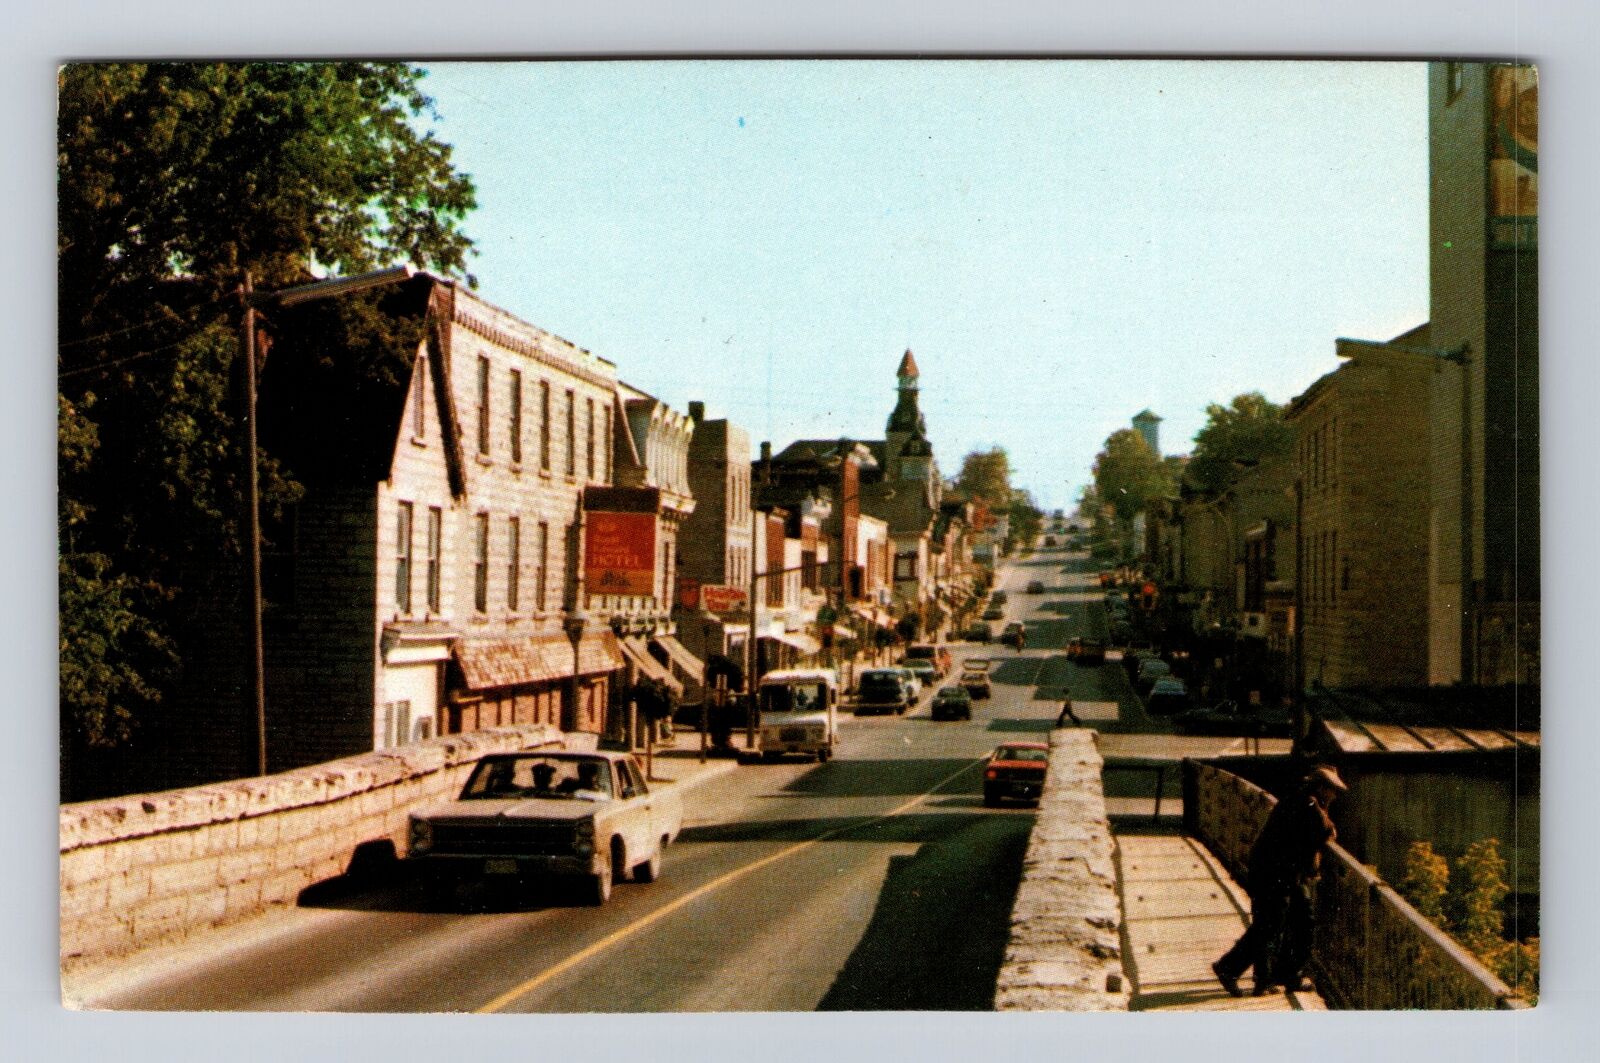 St Marys Ontario-Canada, Greetings from St Marys, Queen Street, Vintage Postcard